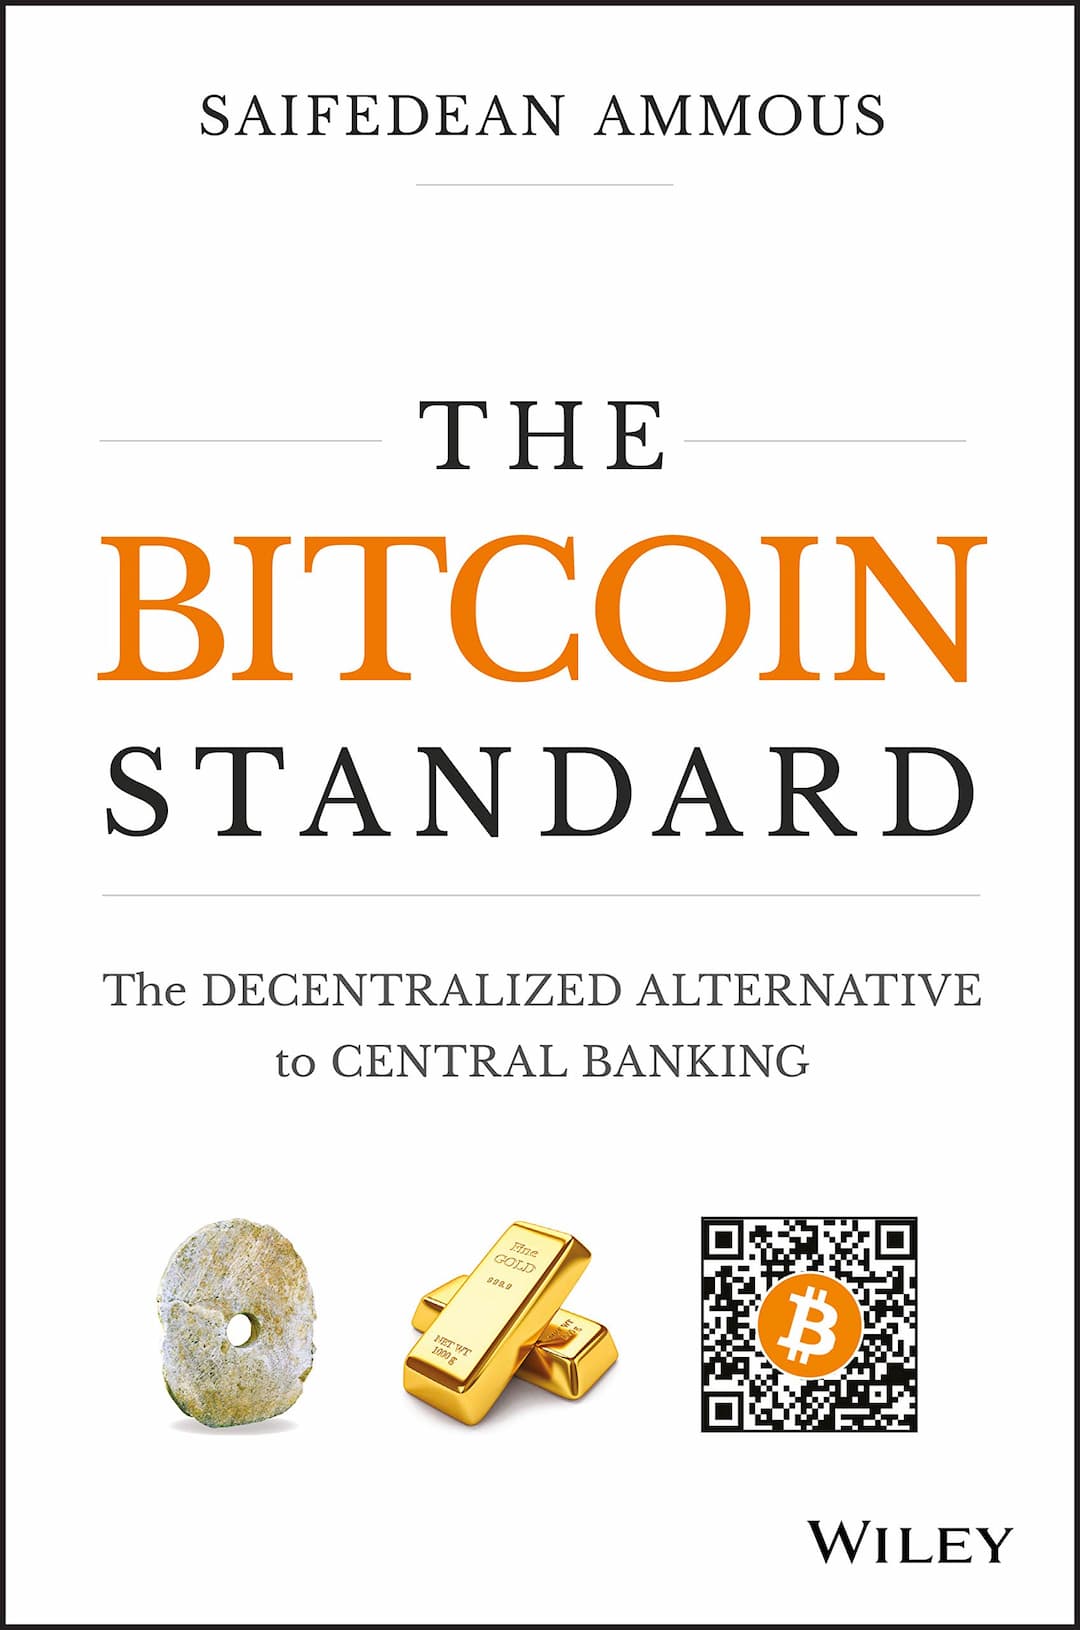 amazon bitcoin, bitcoin, bitcoin correction, bitcoin euro, bitcoin gold price prediction, bitcoin lifestyle, counseling, cryptocurrency, education, free books, growth mindset book, how to invest in bitcoin, how to turn bitcoin into cash, how to use bitcoin atm, investment help, Organizational Behavior, PDFhive Bestsellers, personal growth, Saifedean Ammous, Self Help, The Bitcoin Standard, The Bitcoin Standard by Saifedean Ammous, the bitcoin standard pdf